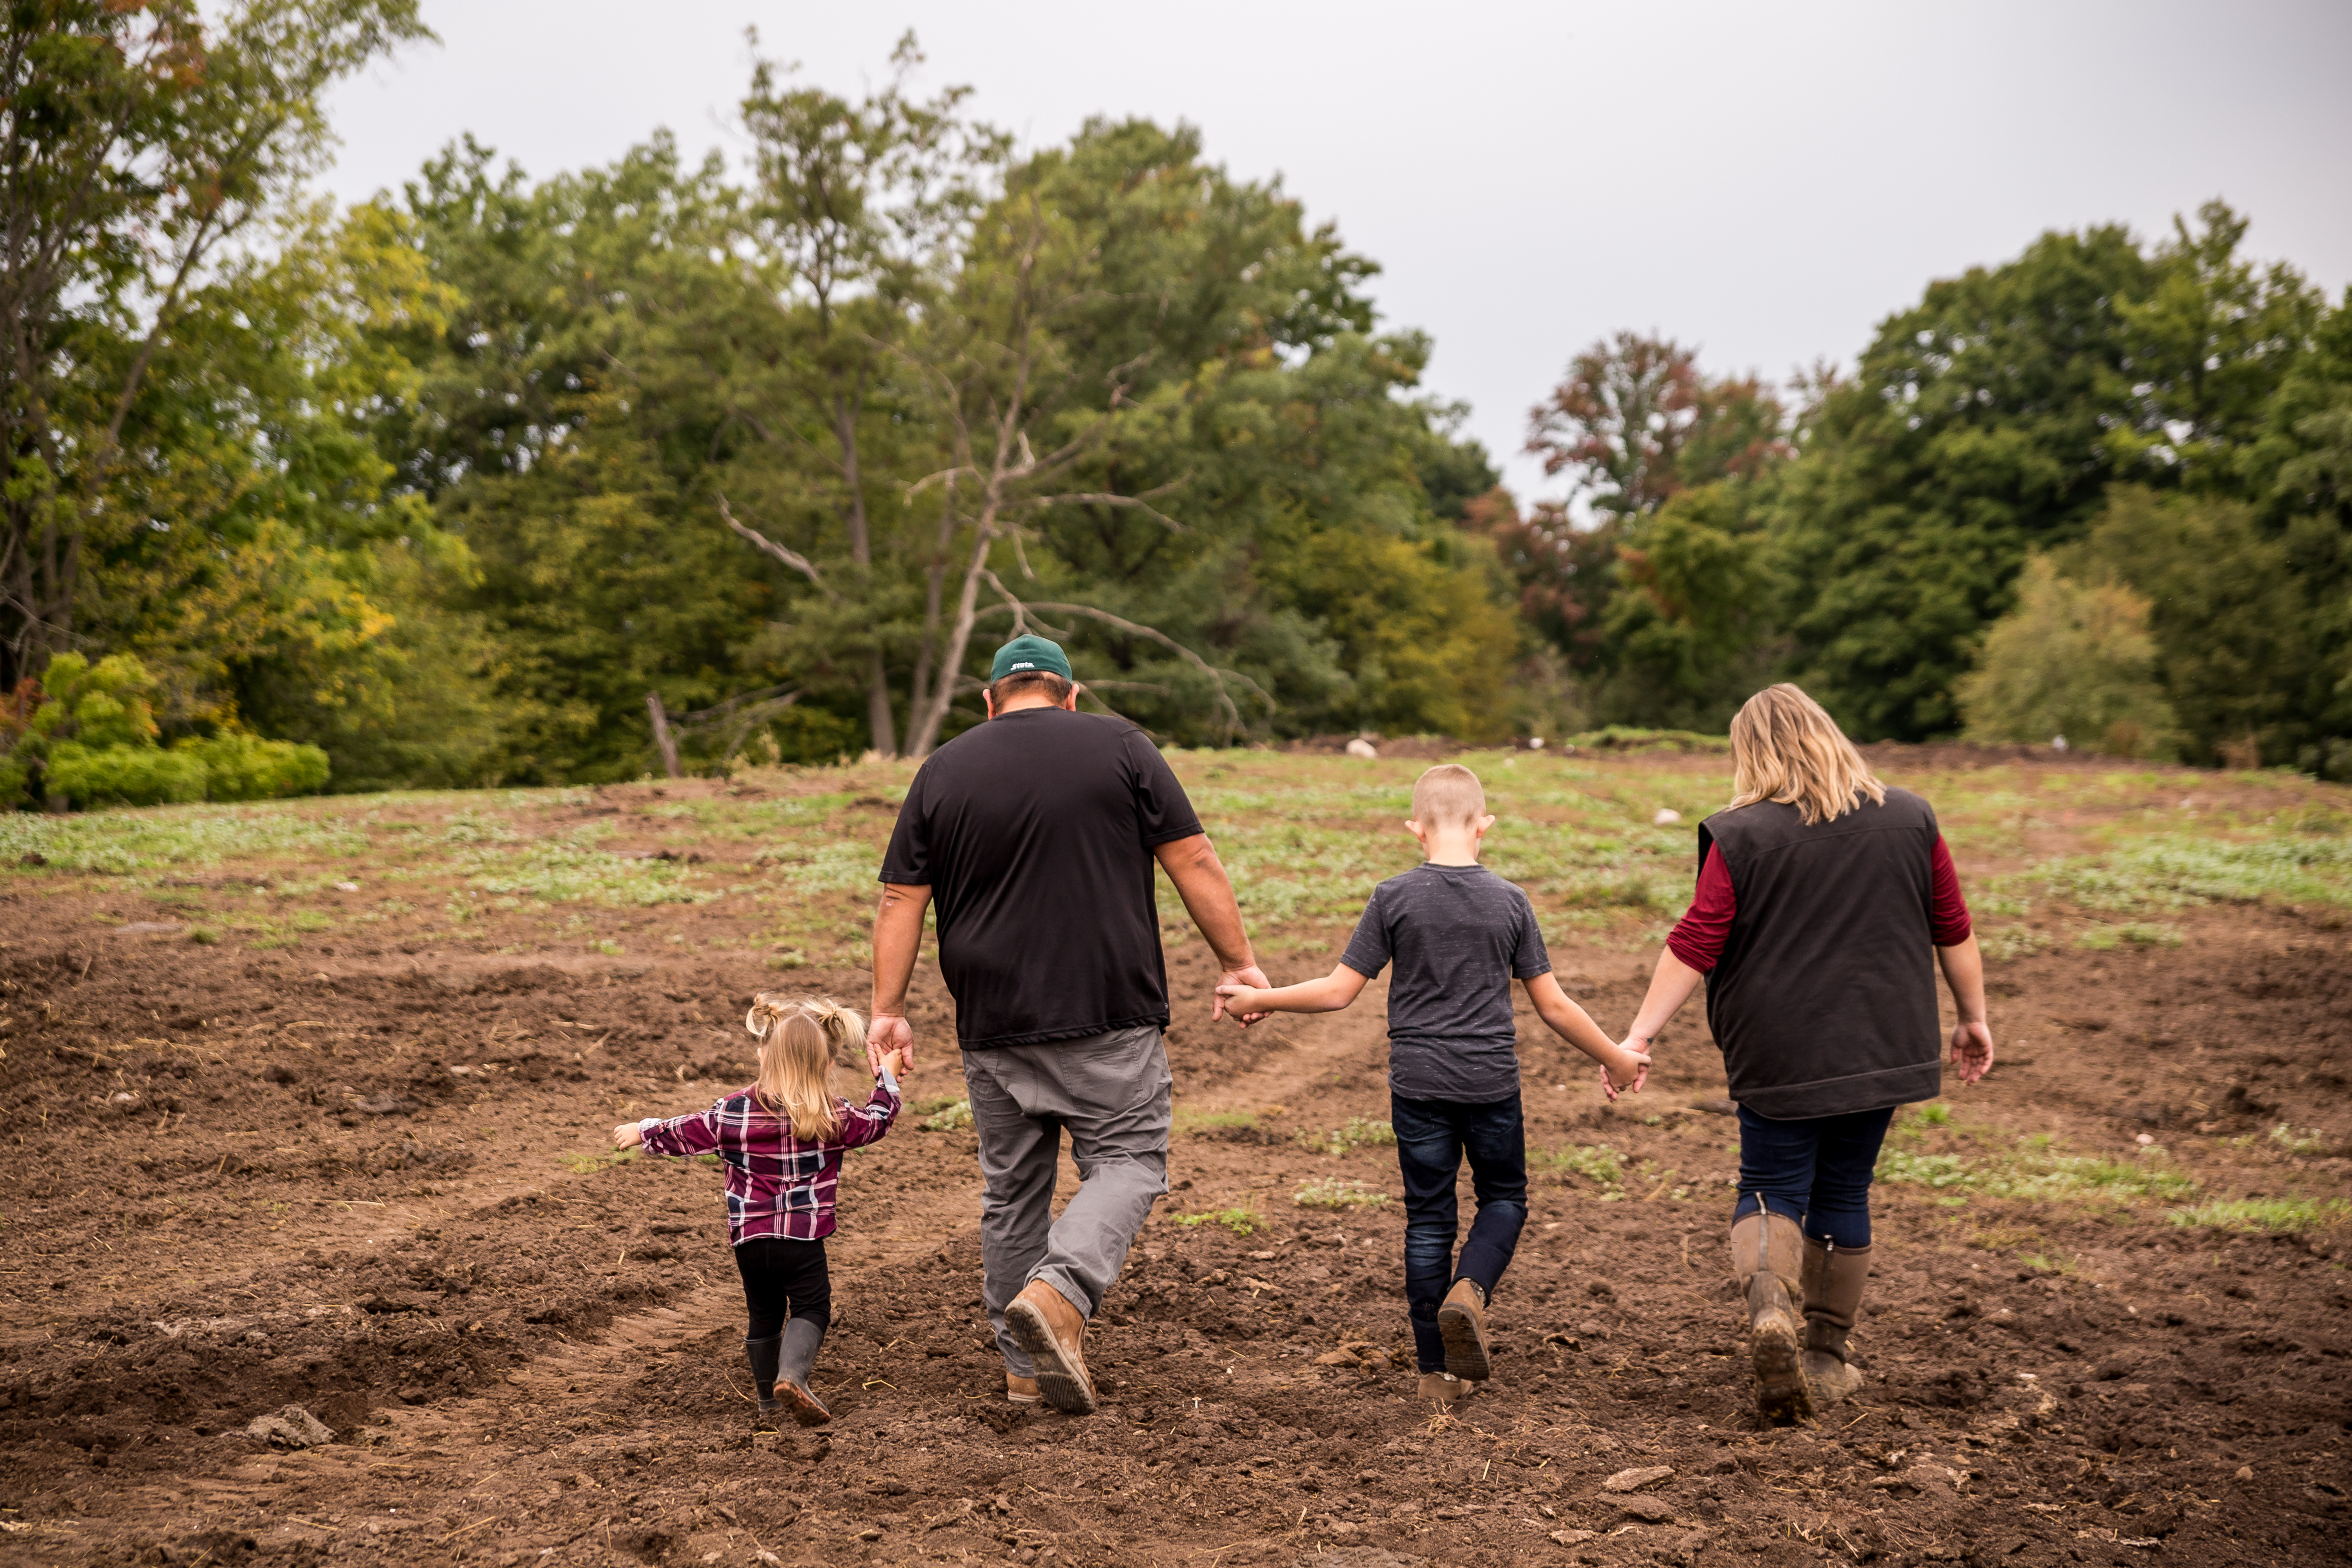 A man, a woman, and two children holding hands as they walk away from the camera through an unplanted field.